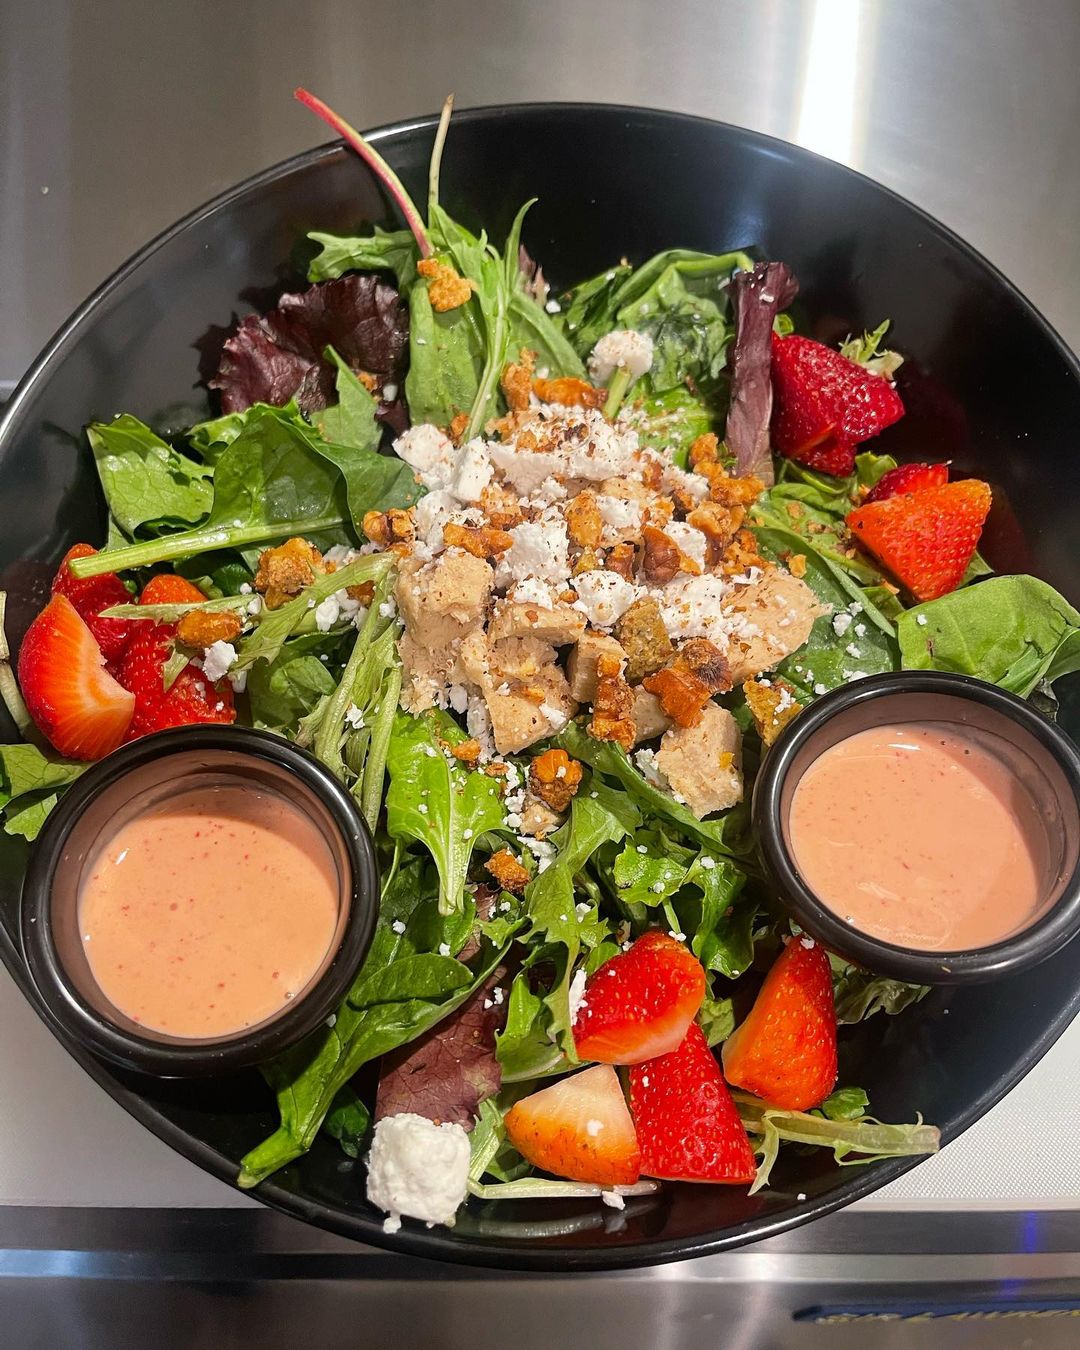 Salad in bowl from JustVeggiez